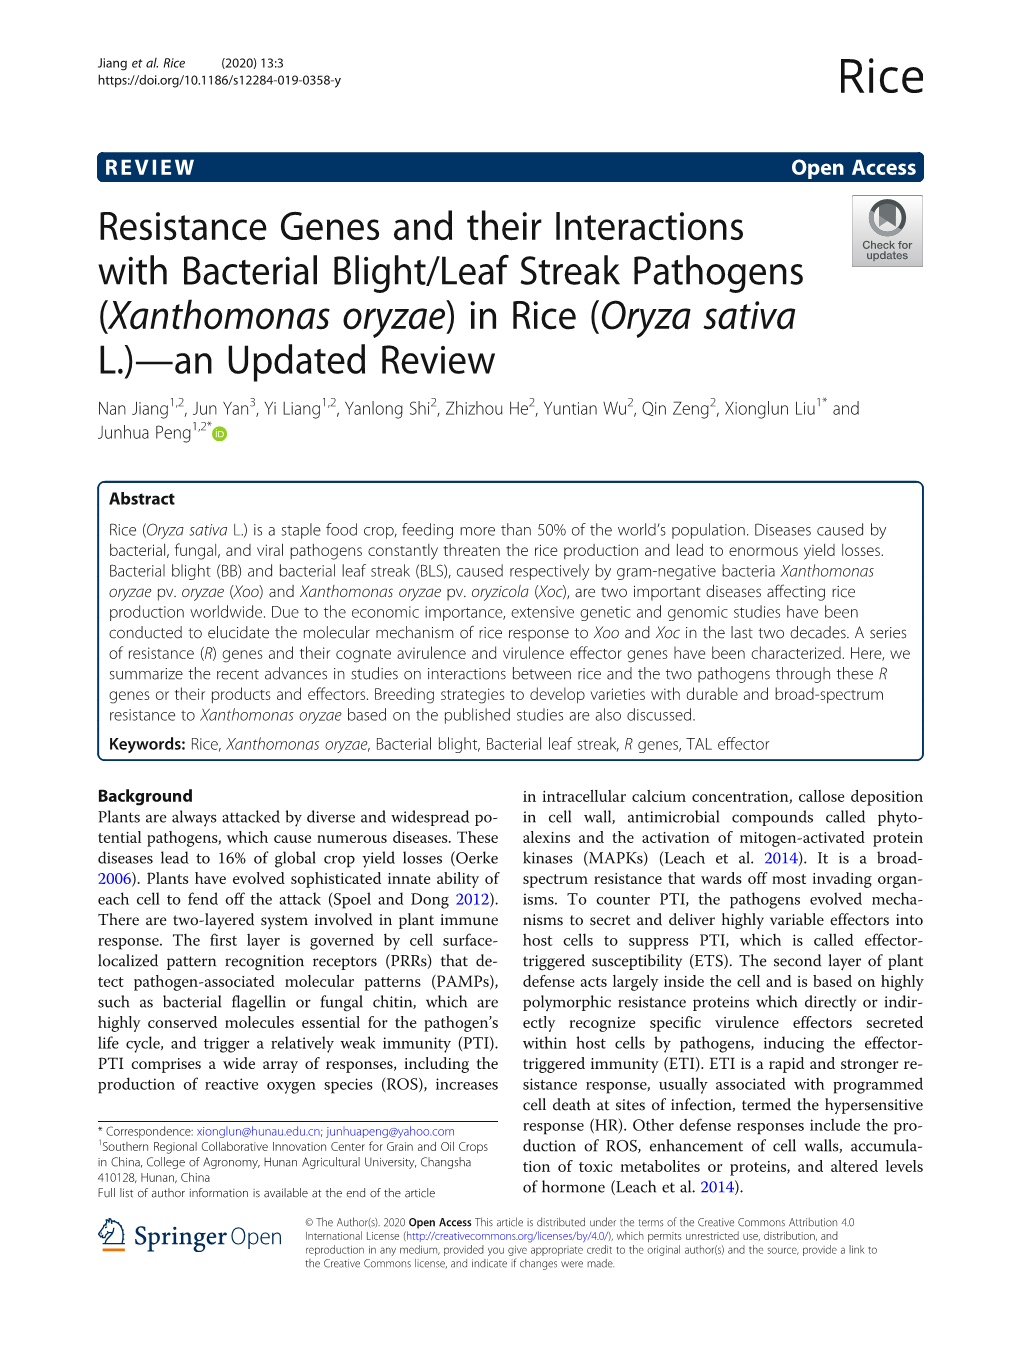 Resistance Genes and Their Interactions with Bacterial Blight/Leaf Streak Pathogens (Xanthomonas Oryzae) in Rice (Oryza Sativa L.)—An Updated Review